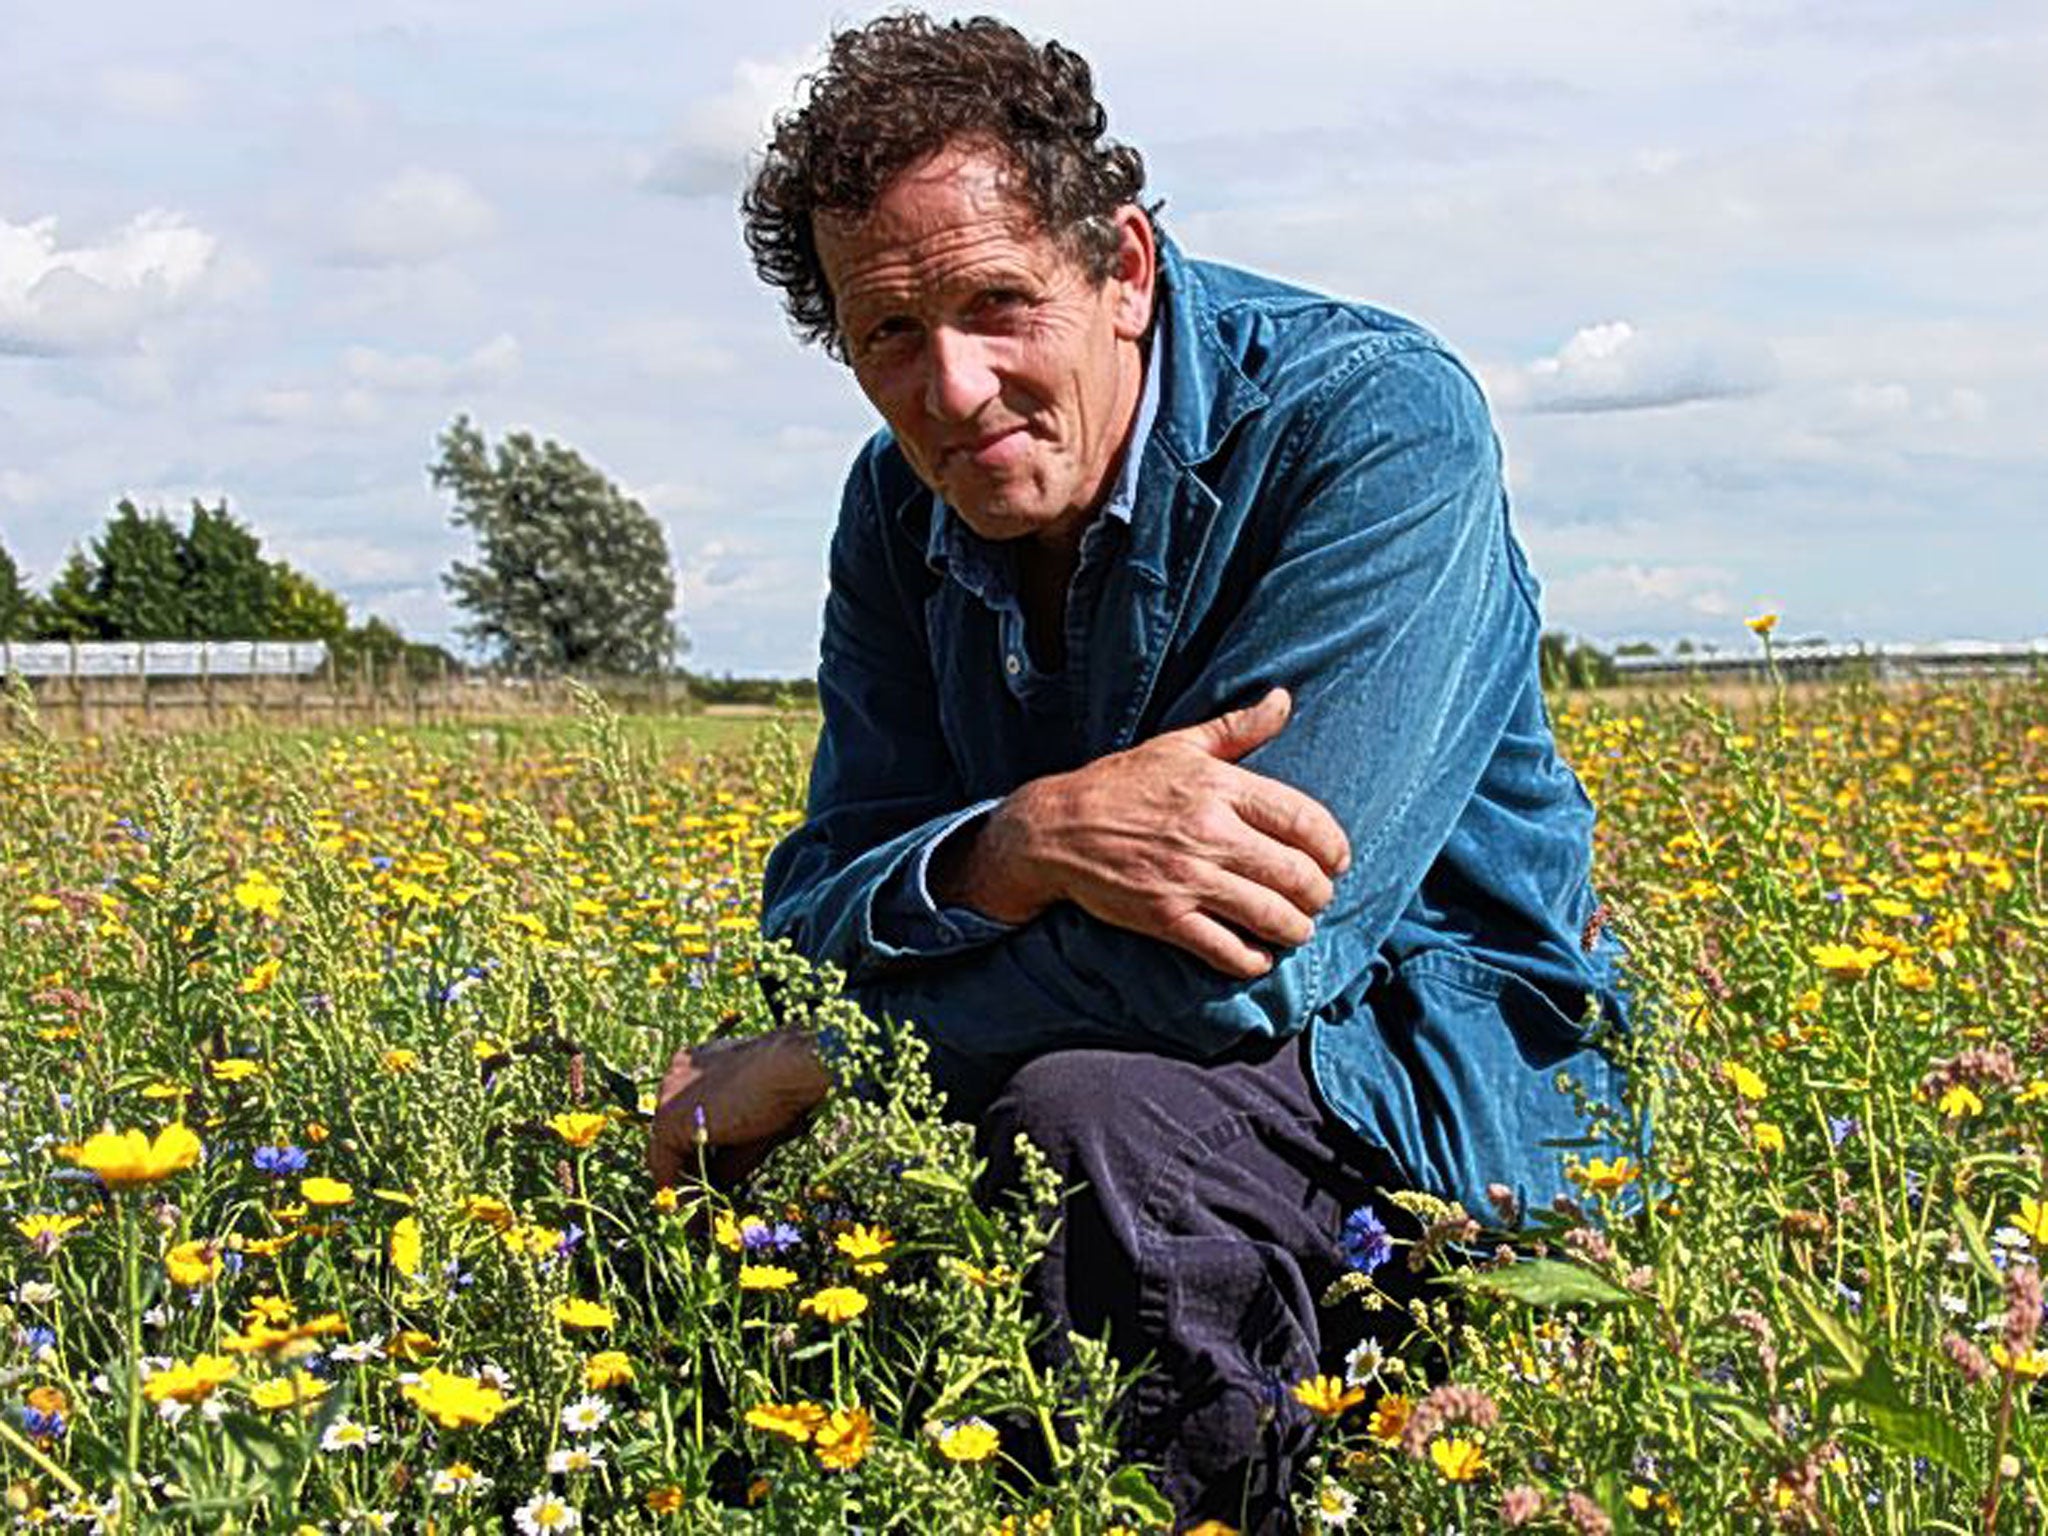 Gardeners' World presenter Monty Don said it was "galling" the show was cancelled